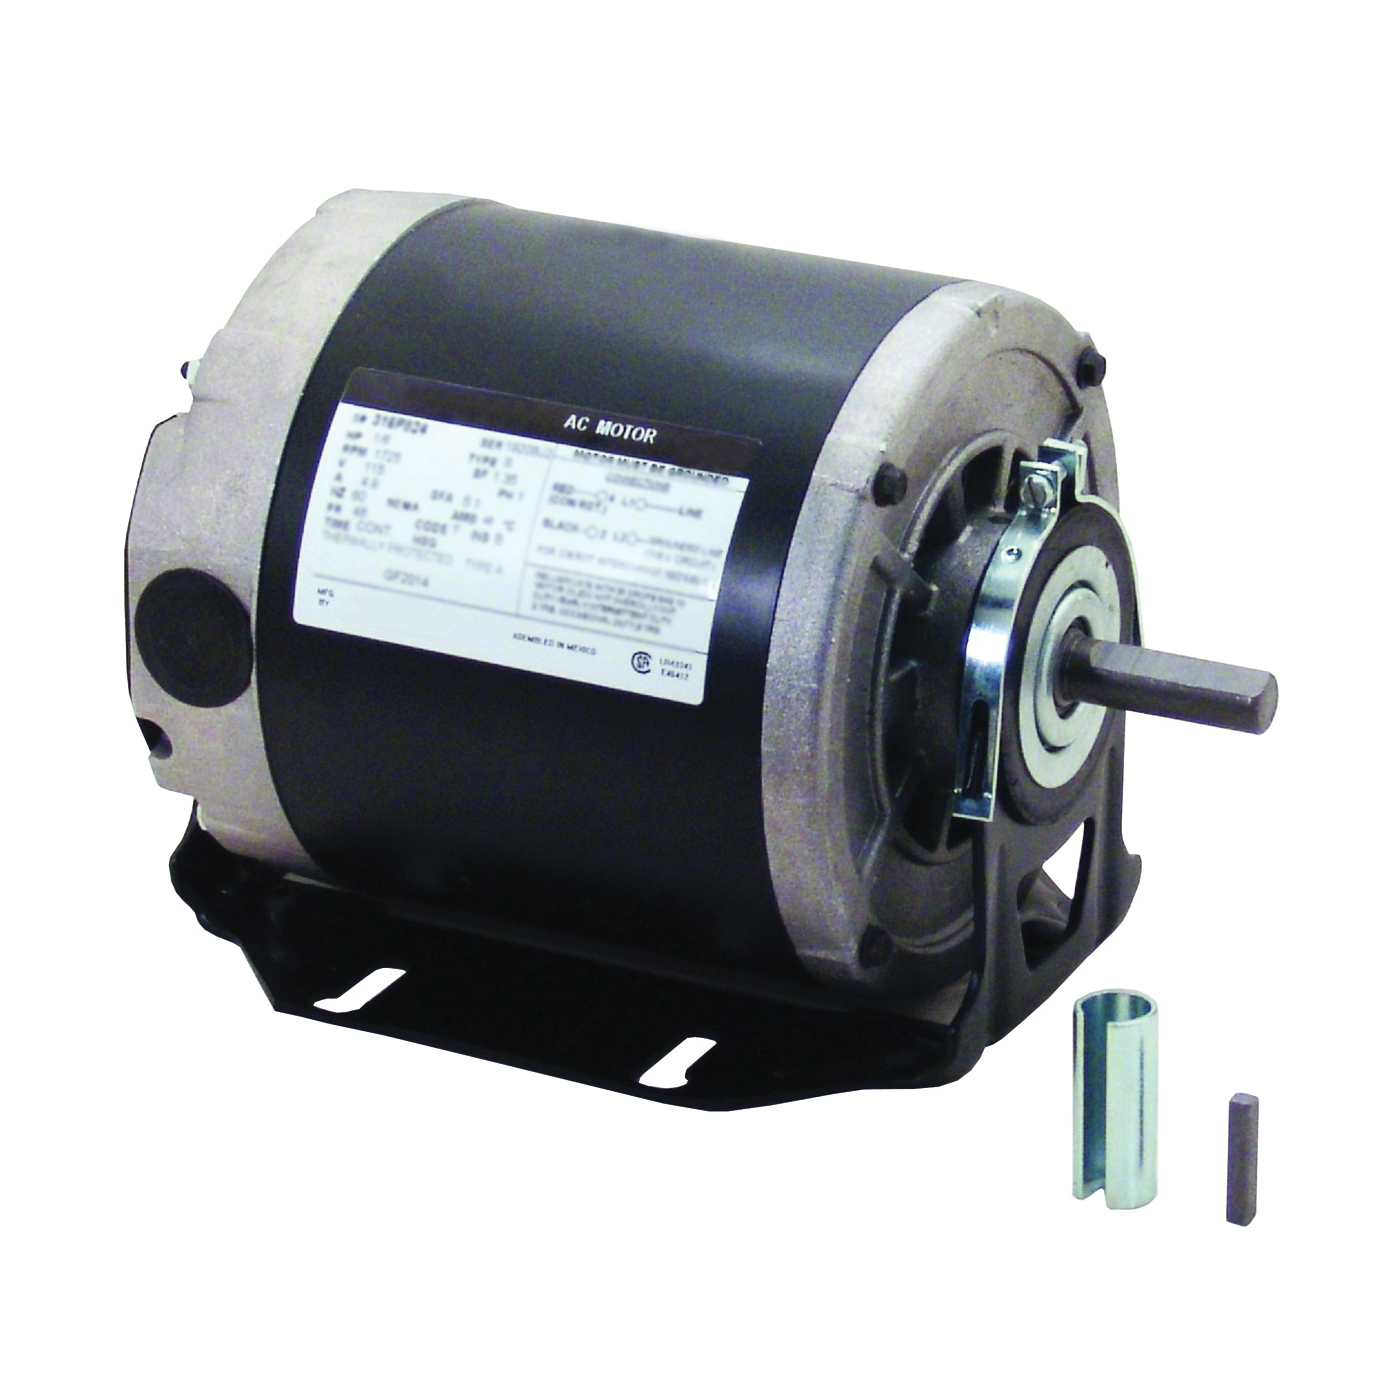 GF2054 Electric Motor, 0.5 hp, 1-Phase, 115 V, 1/2 in Dia x 1-1/2 in L Shaft, Sleeve Bearing